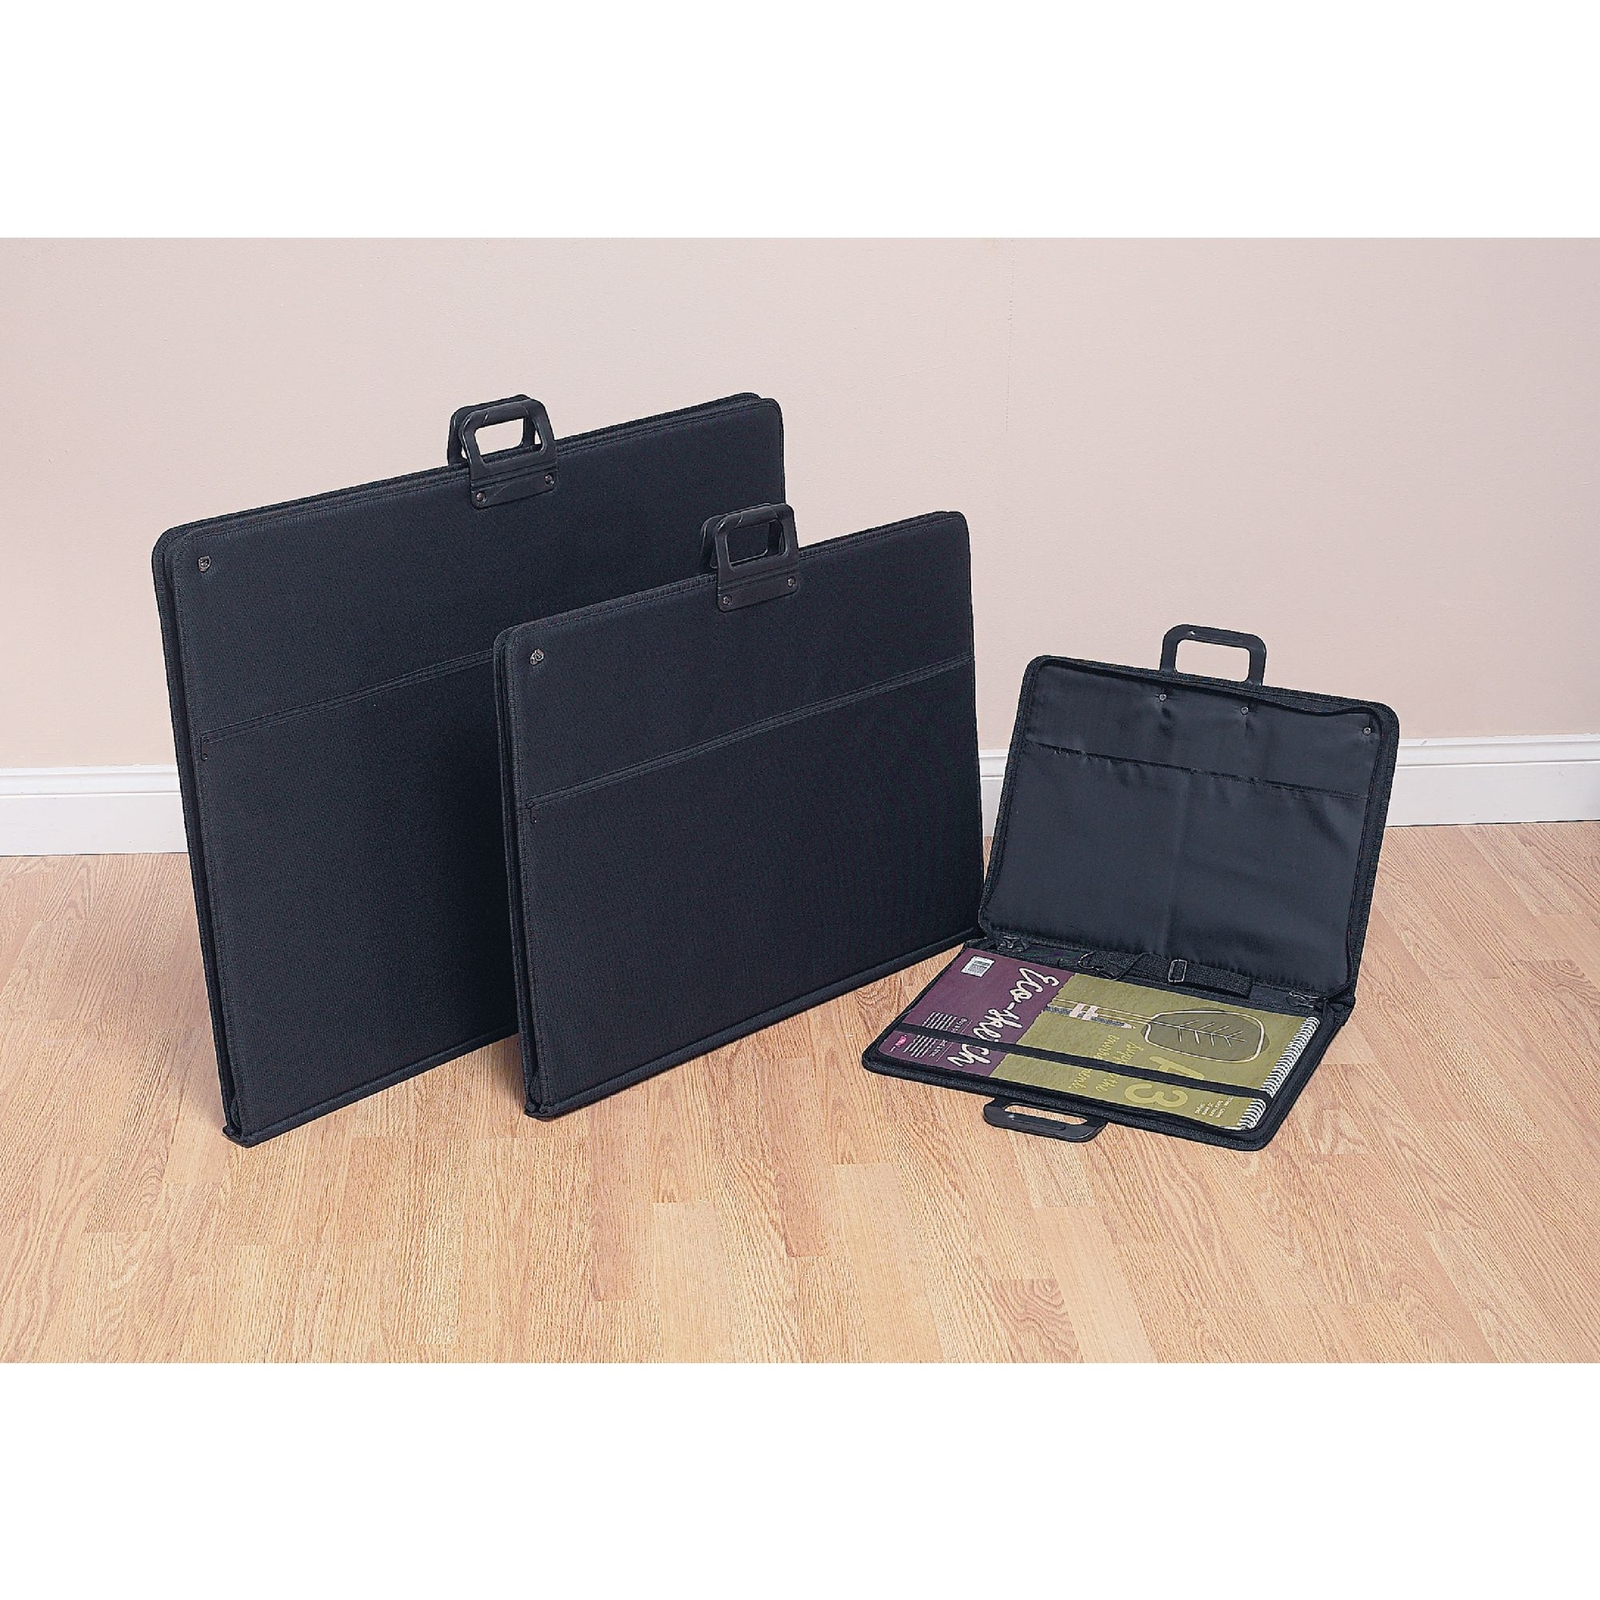 A1 Economy Zip Carrying Case